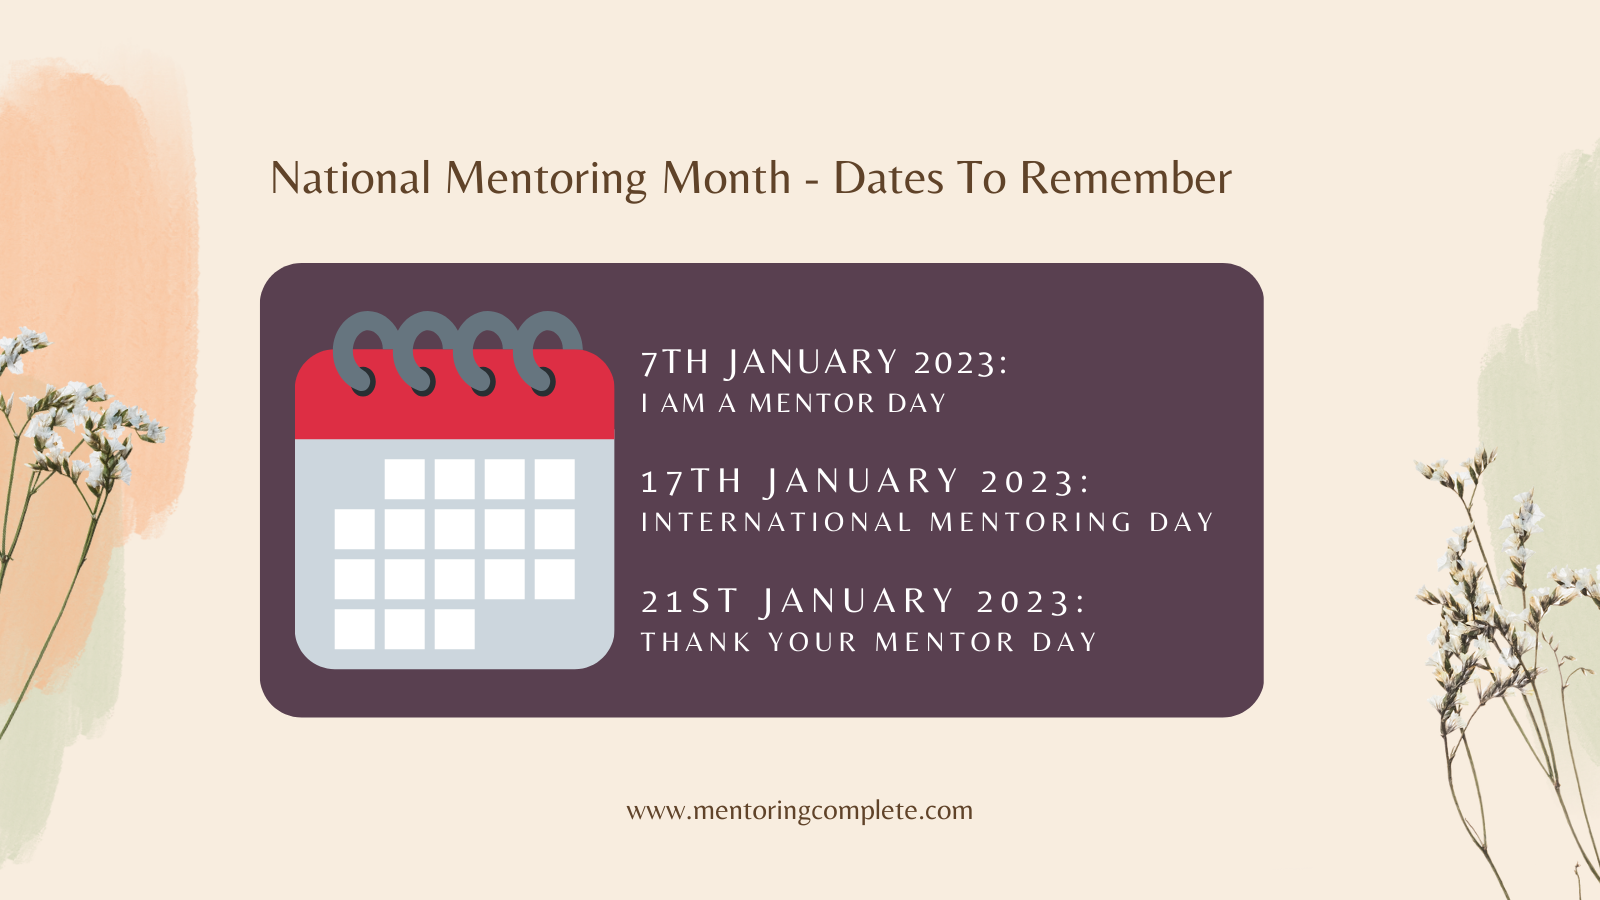 Important dates of mentoring